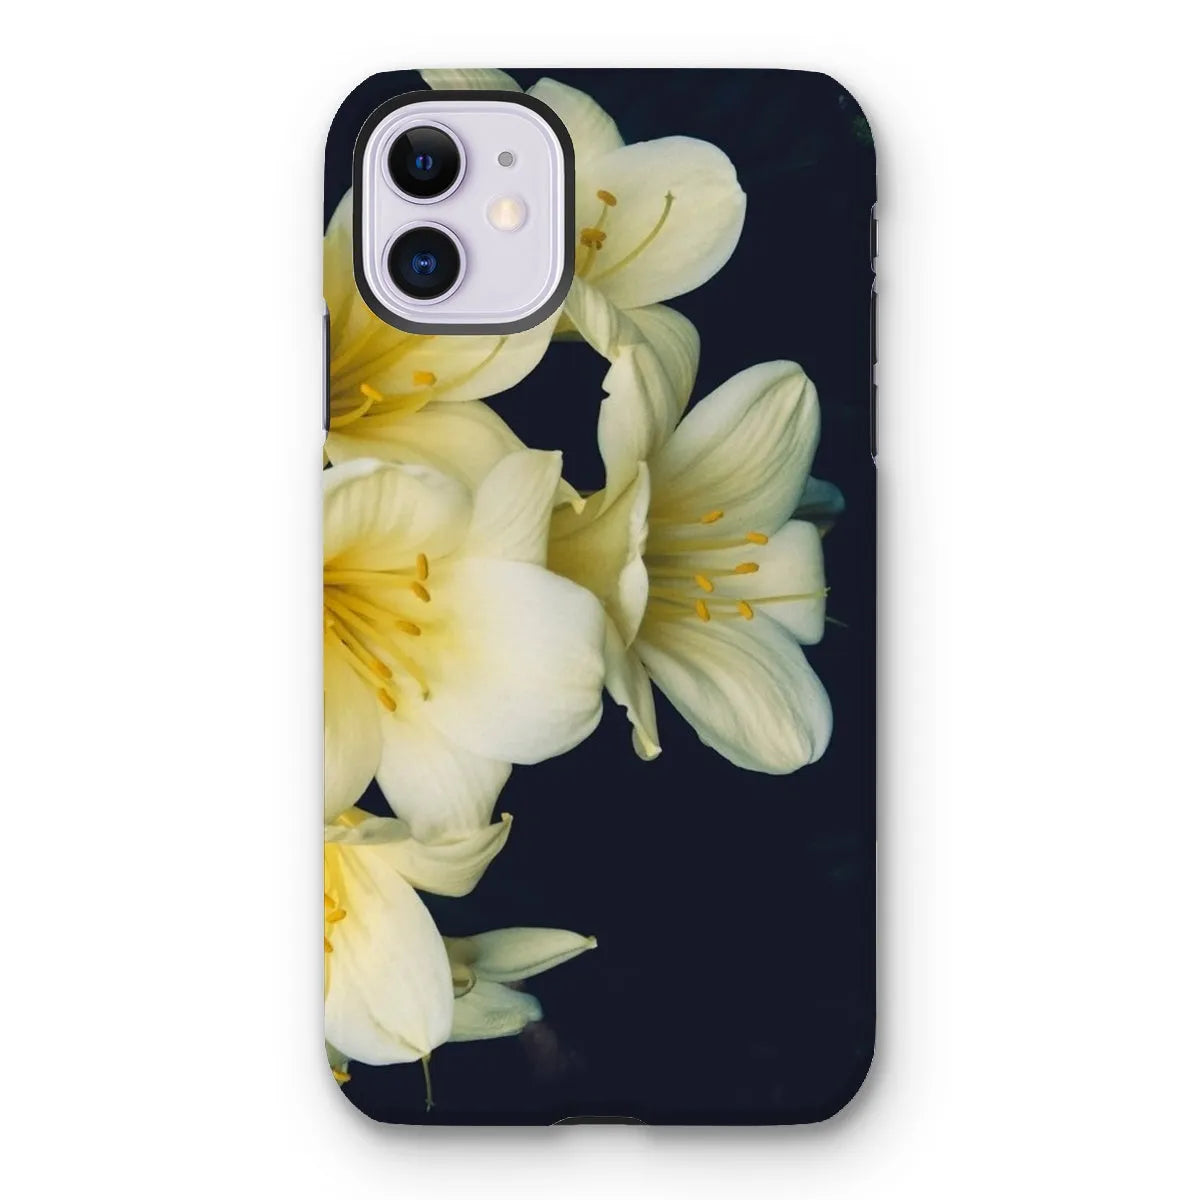 Flower Power Too Tough Phone Case - Iphone 11 / Matte - Mobile Phone Cases - Aesthetic Art